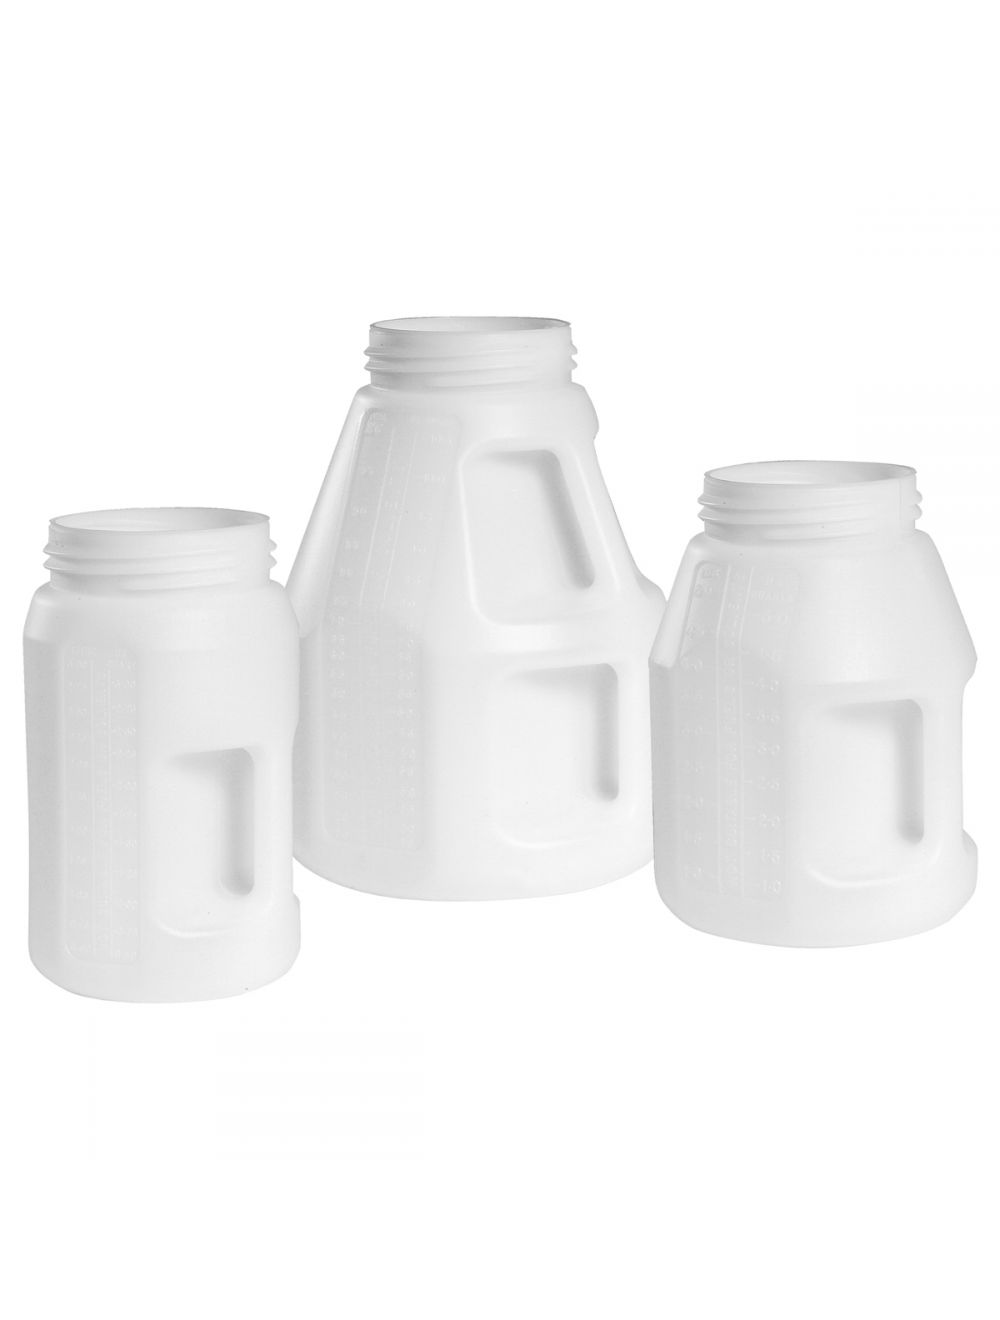 Xpel Oil Storage Containers